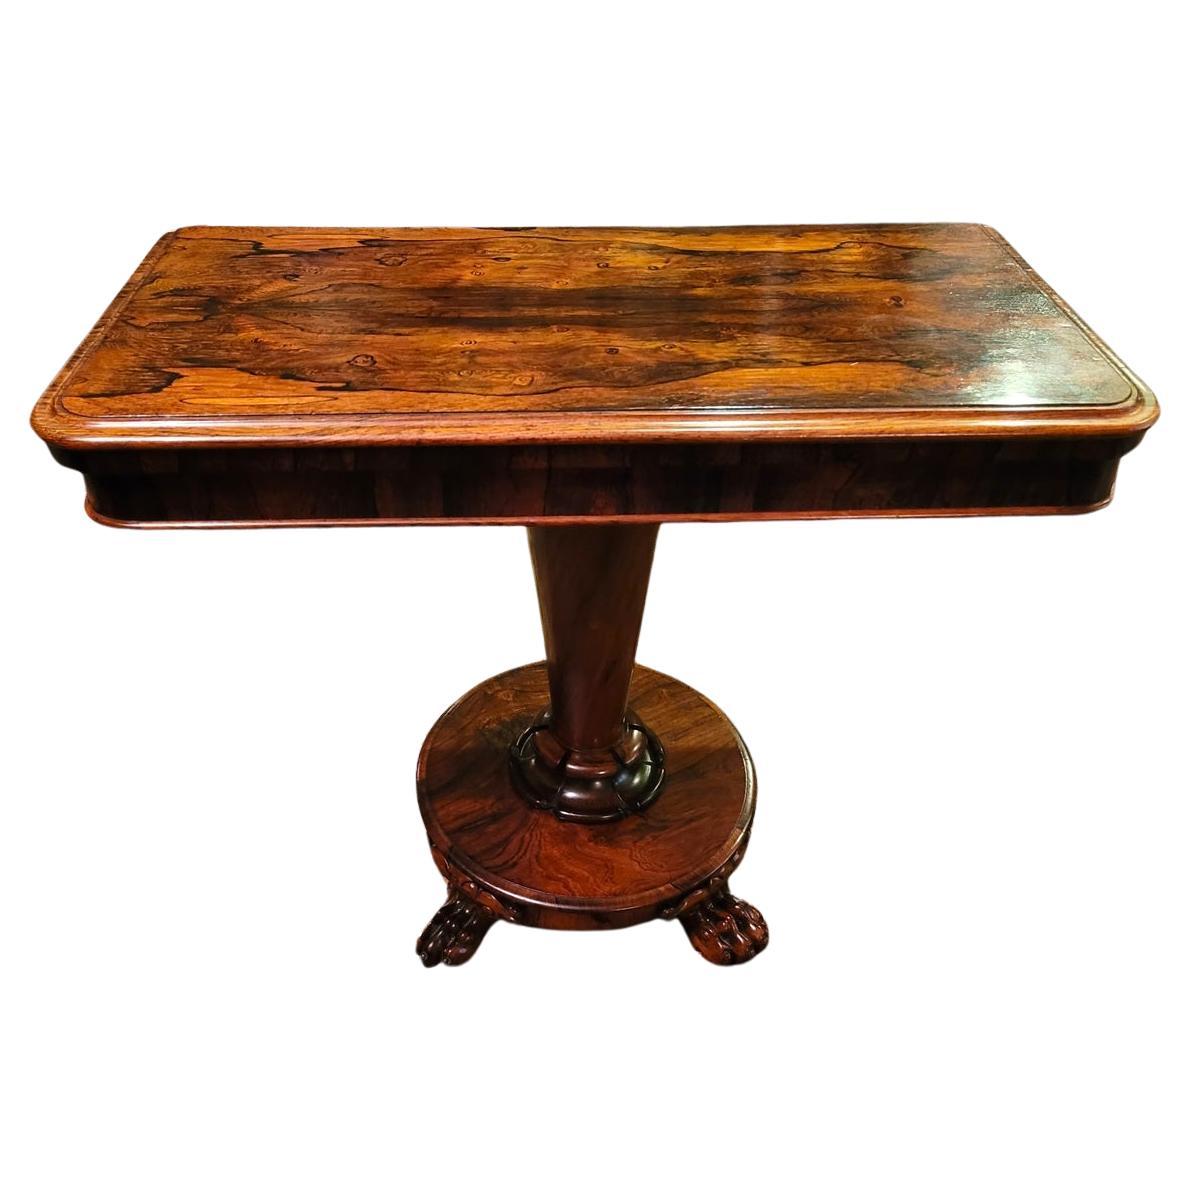 Regency Fold over Side Table with Lions Paw Feet in the Manner of Gillows